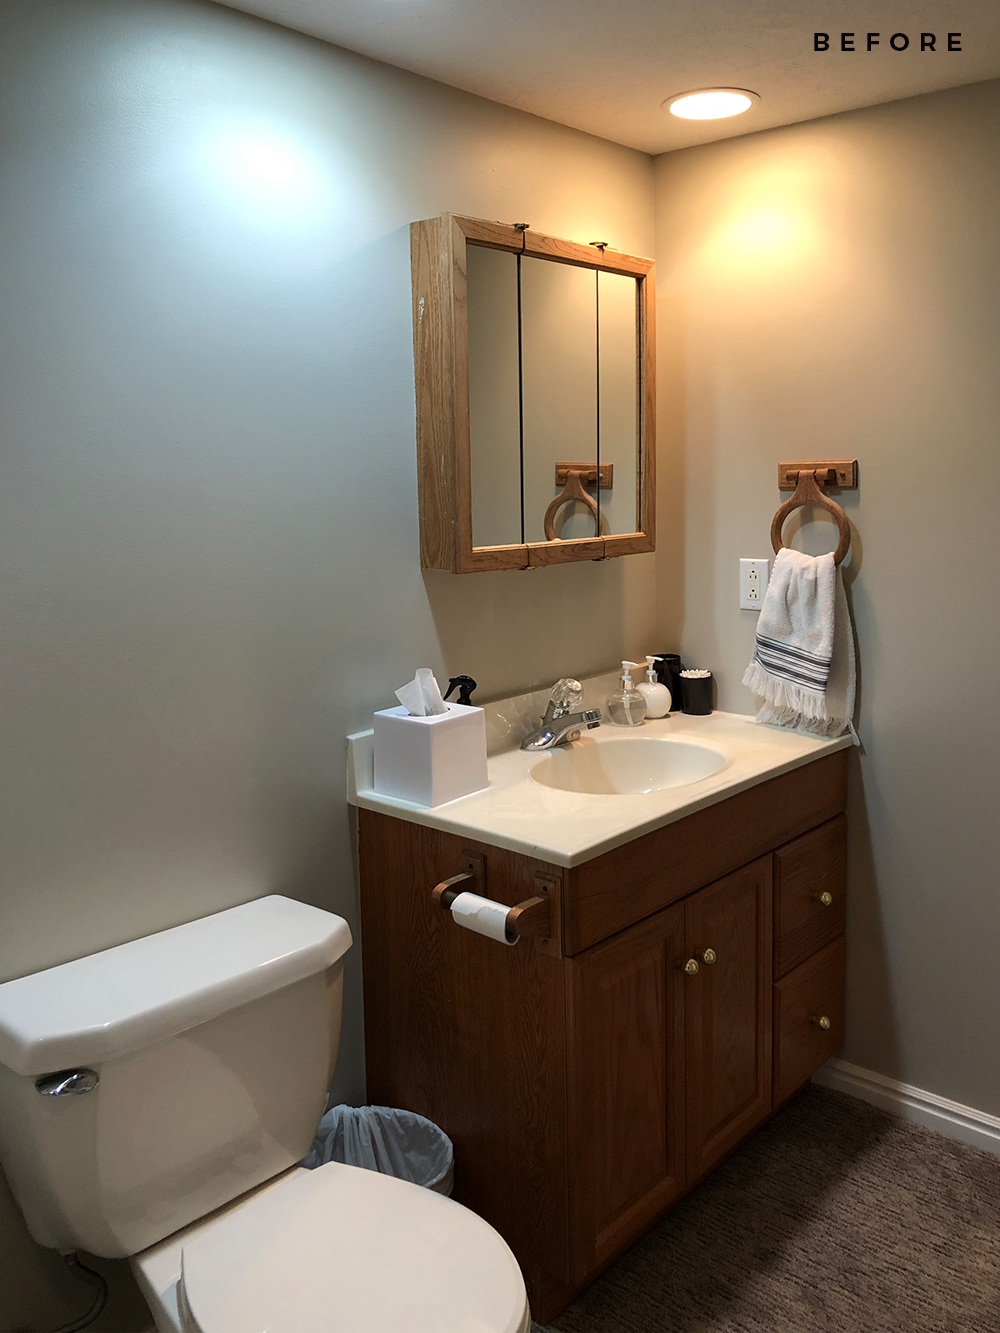 Our Basement Bathroom Design Plan & Before Images - roomfortuesday.com